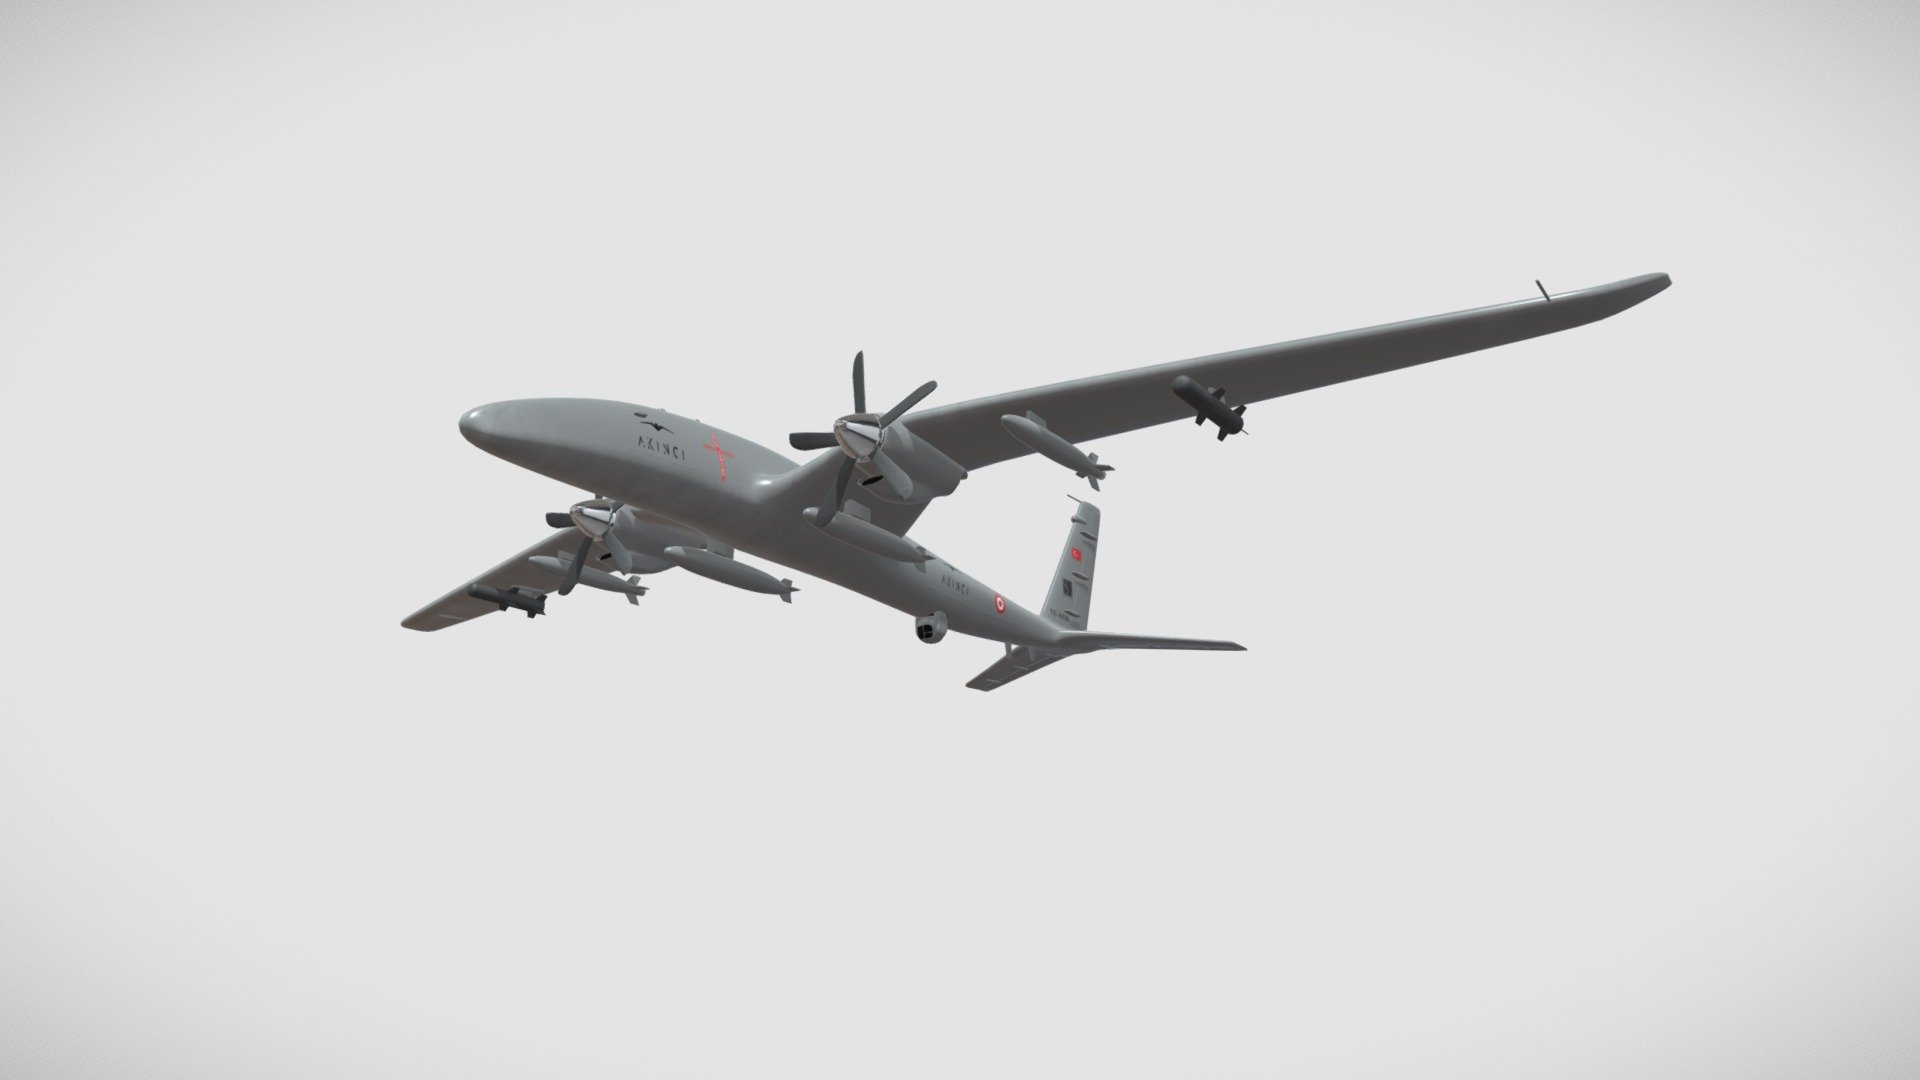 This is a high-quality Bayraktar Akinci Unmanned Combat Air Vehicle (UCAV) 3d model.

I used Blender software to make the model.

For more: 
https://cemgurbuz.com/bayraktar-akinci-drone - Bayraktar Akıncı UCAV - 3D model by Cem Gürbüz (@cemgurbuz) 3d model